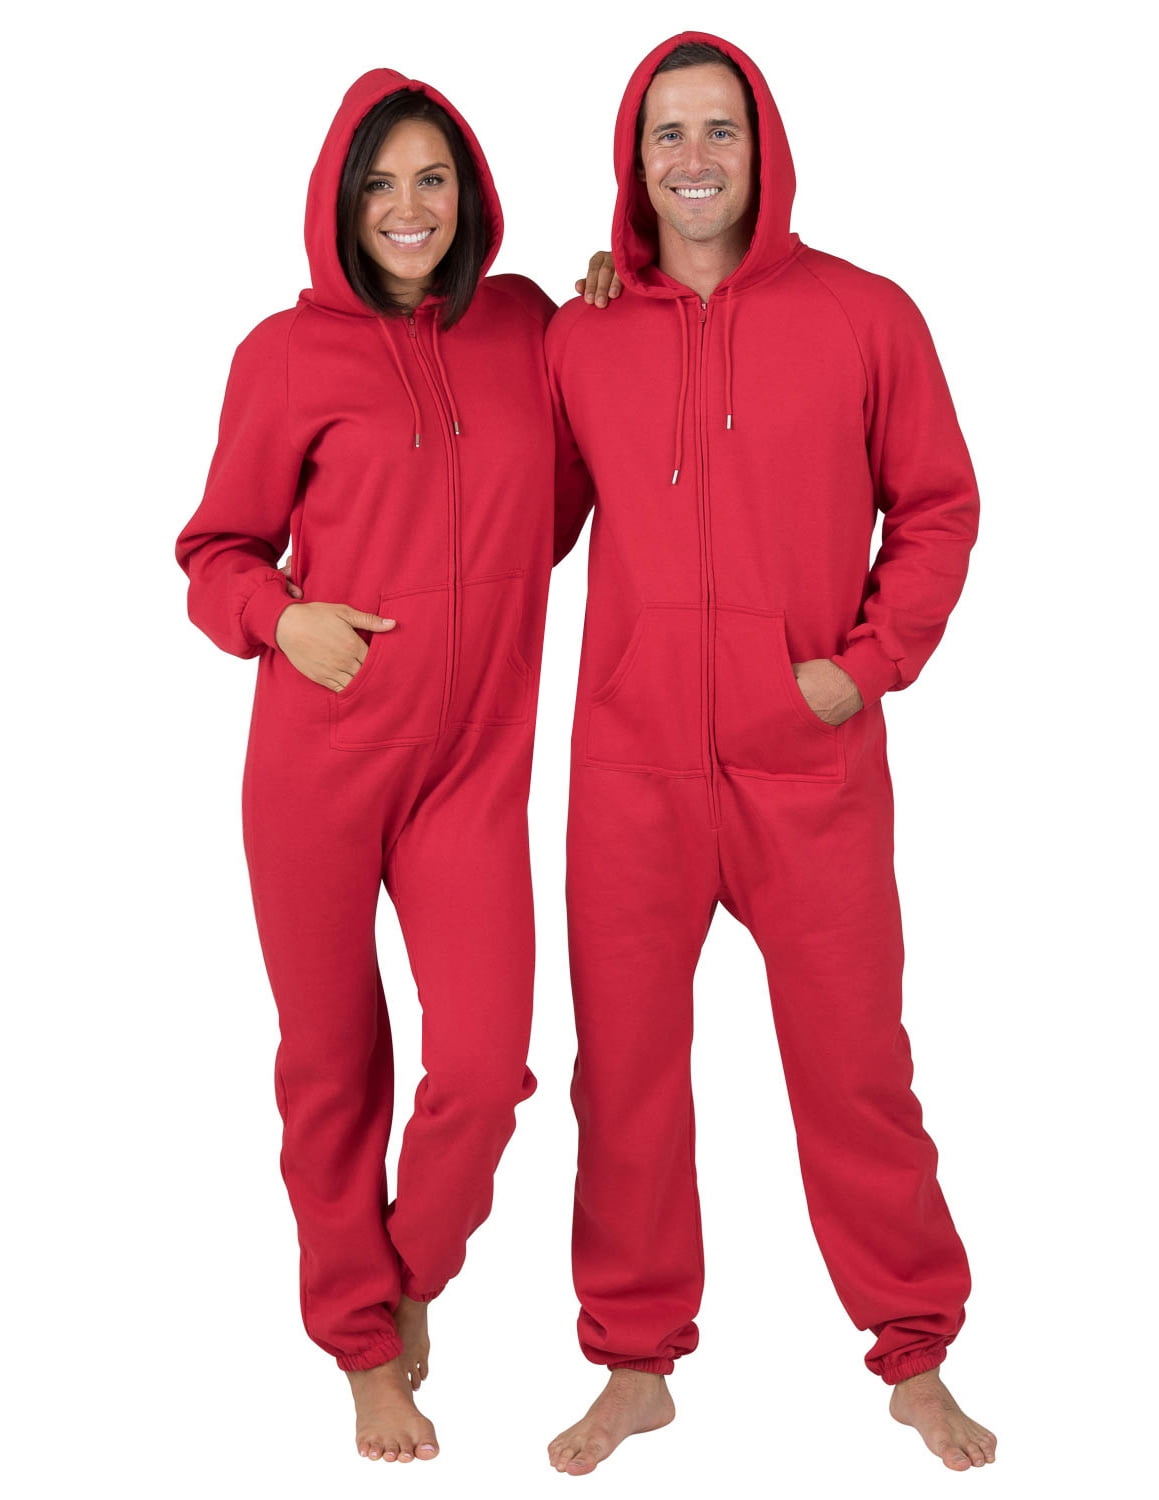 Unisex Adult Onesies One-Piece Footless Jumpsuits for Men and Women Joggies